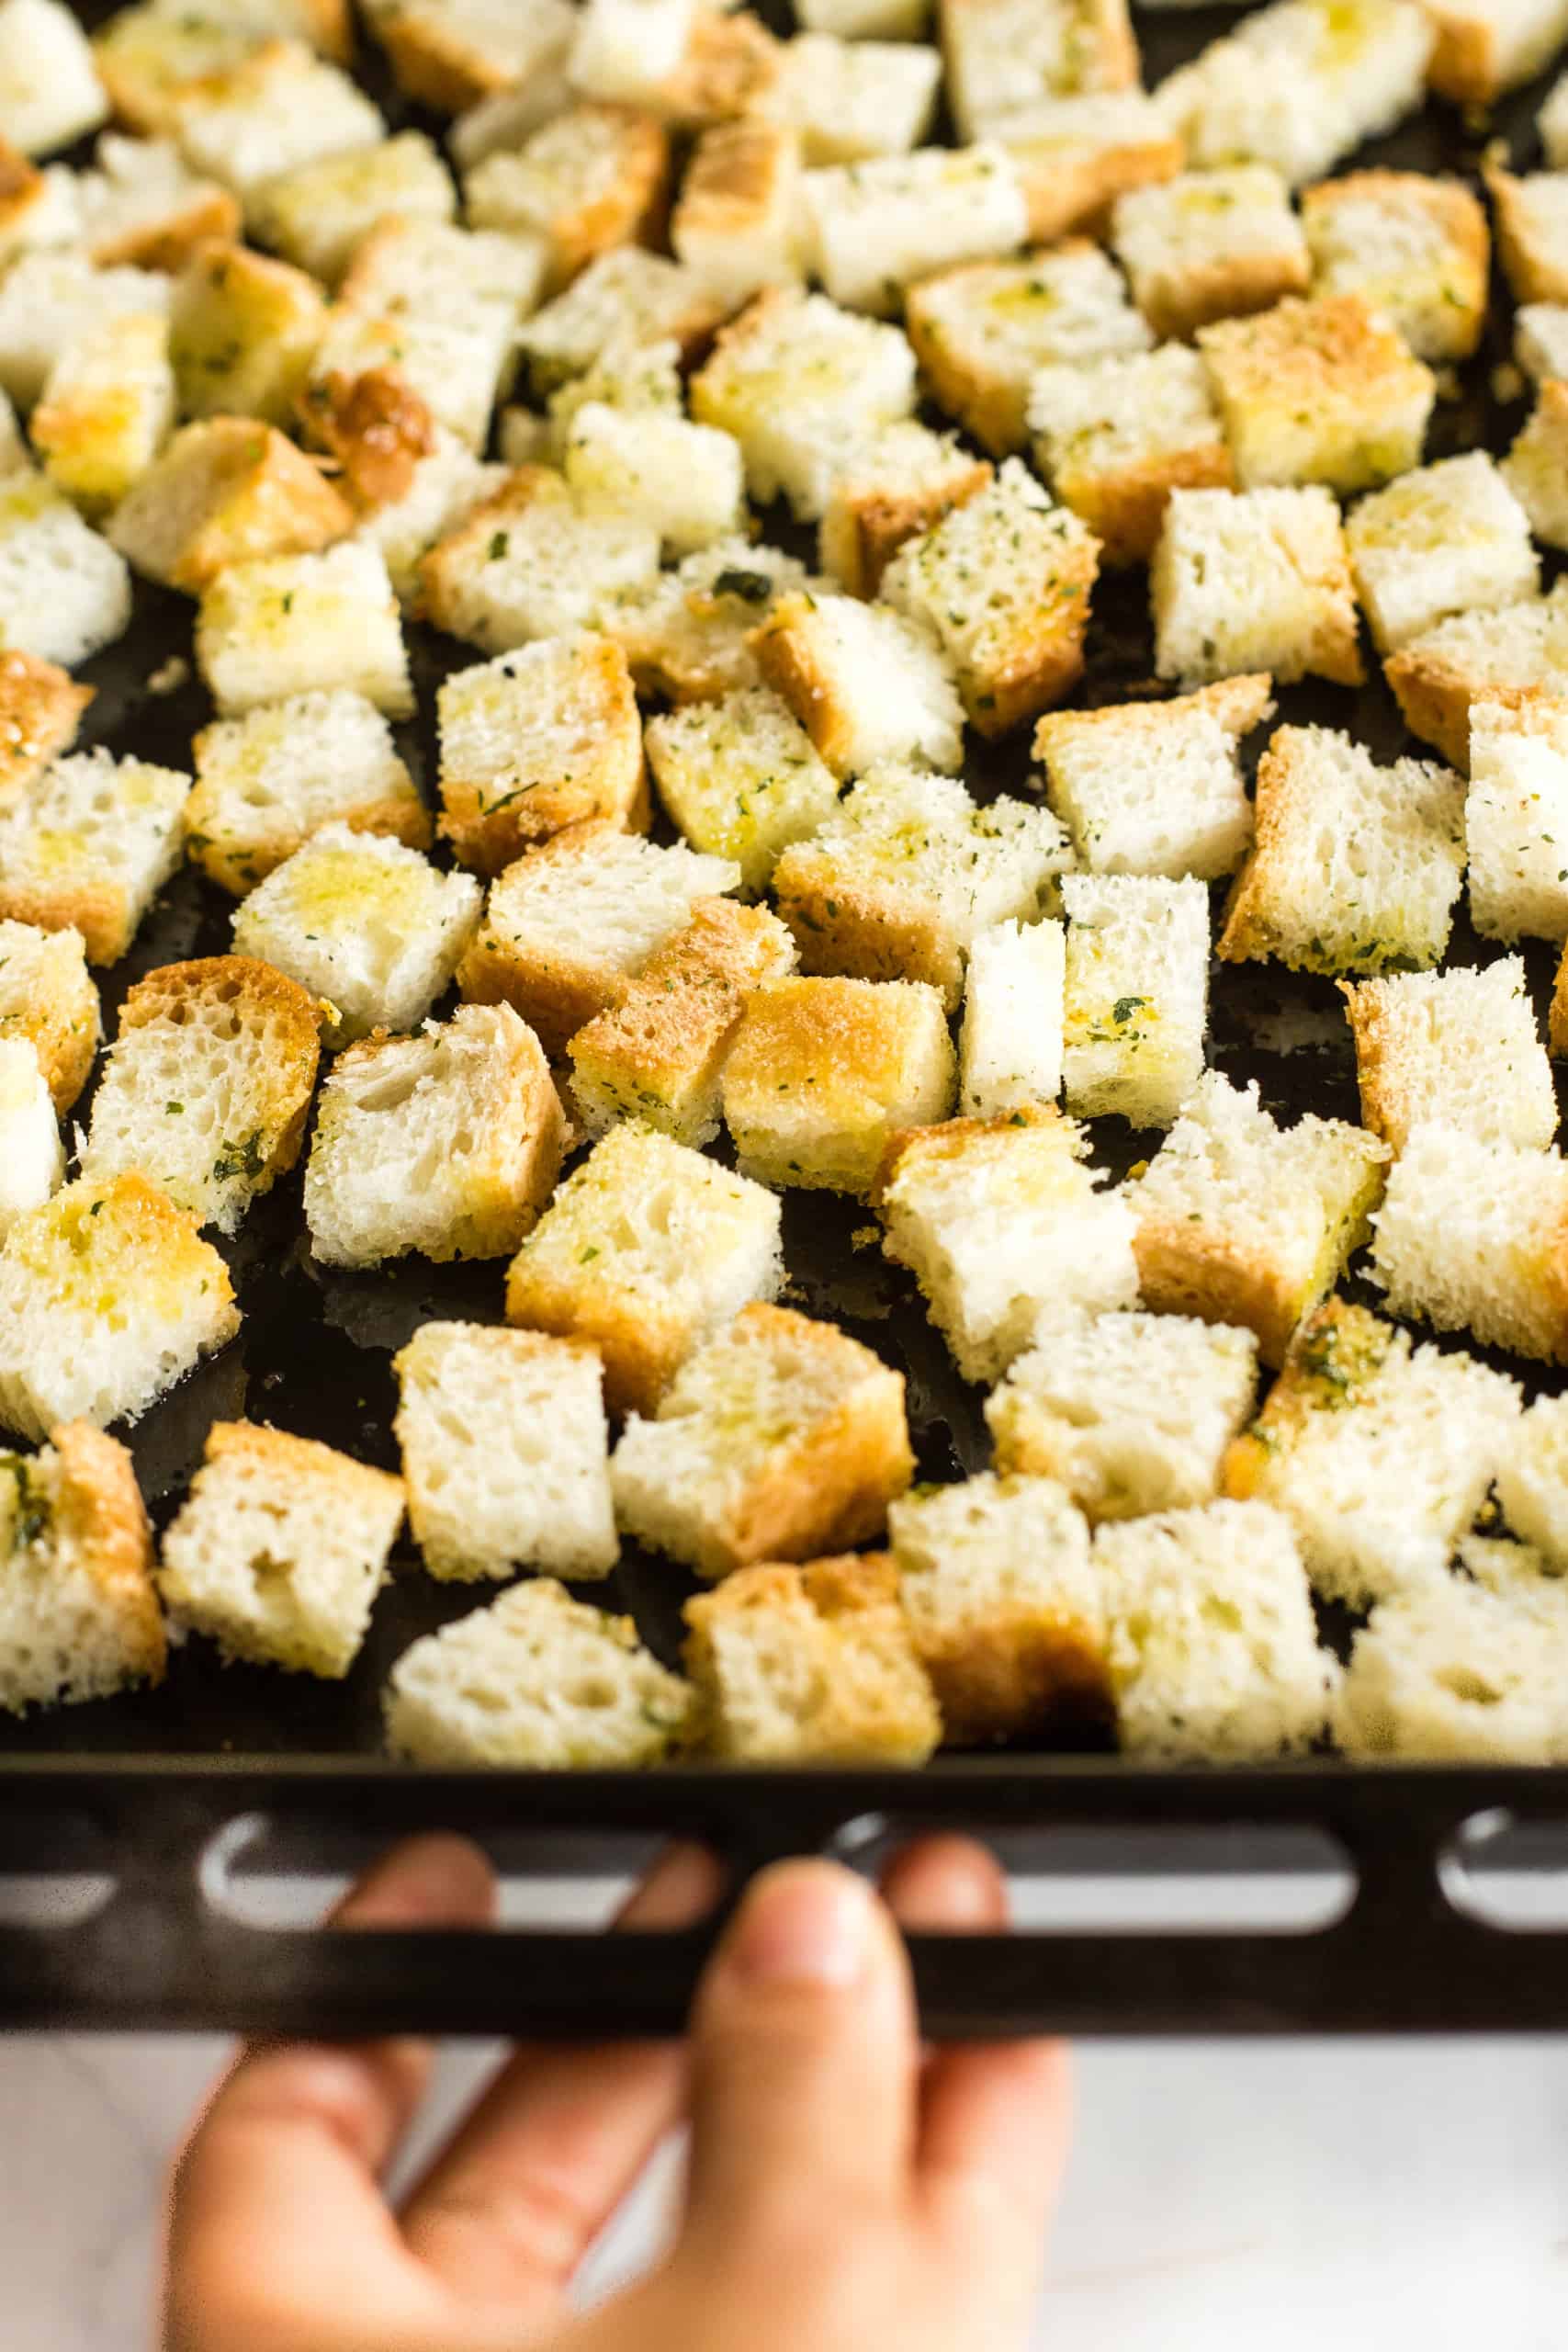 Bread cubes coated with oil and herbs spread out on baking sheet.